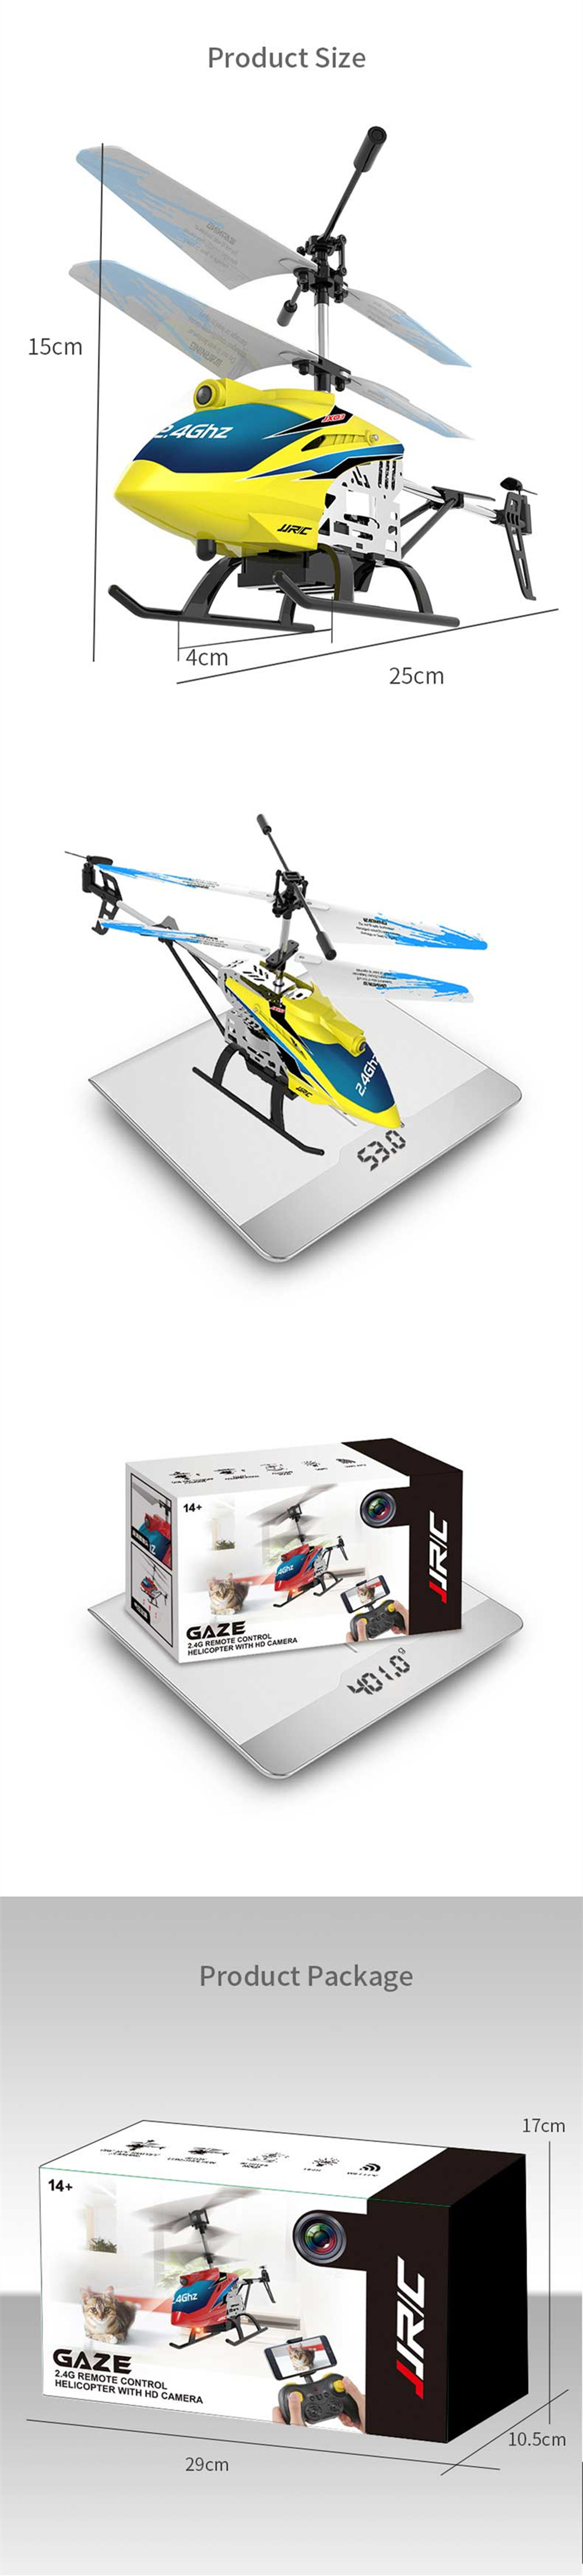 JJRC GAZE JX03 2.4G 4CH Altitude Hold Hover One-key Takeoff RC Helicopter RTF With 720P HD Camera - Photo: 6